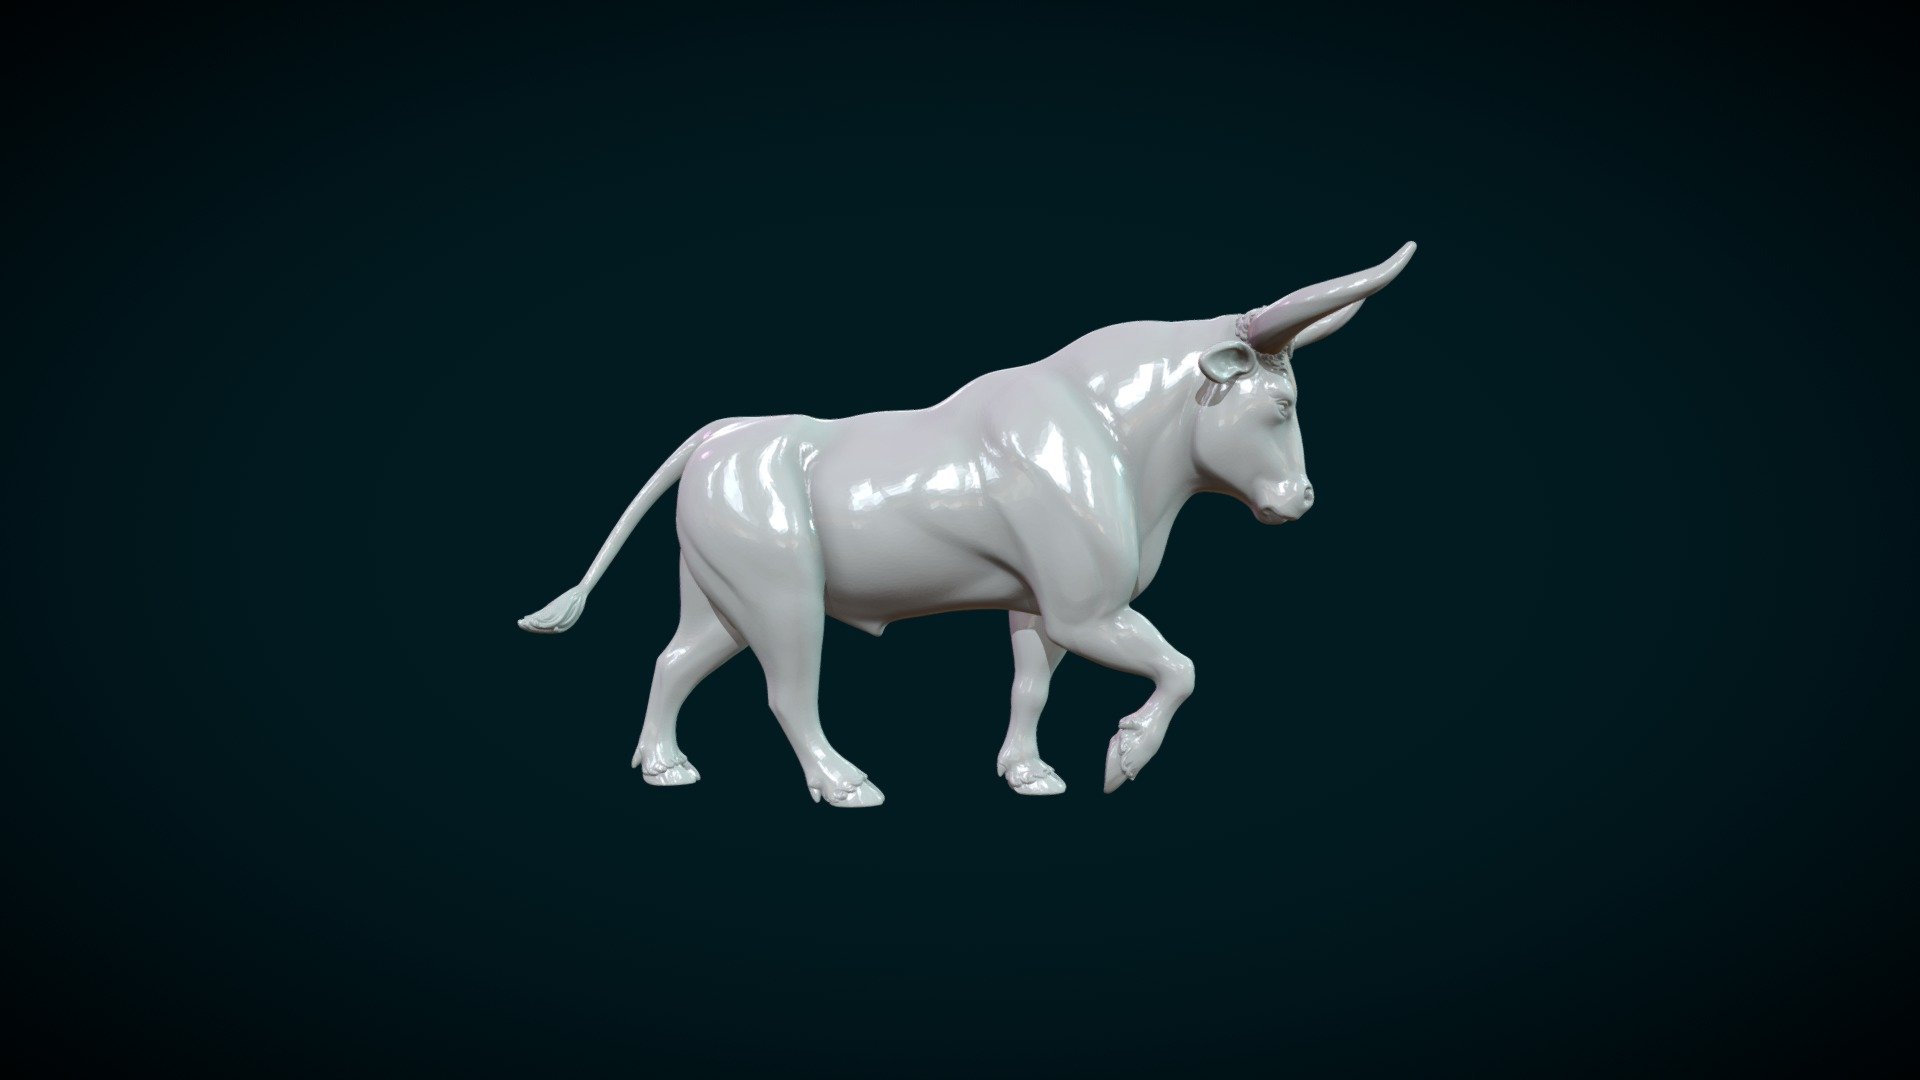 Print ready Bull figure.

Measure units are millimeters, it is about 9.6 mm in length. (yes it is small, so, just scale it up :))

Mesh is manifold, no holes, no inverted faces, no bad contiguous edges.

Available formats: .blend, .stl, .obj, .fbx, .dae

Here is two version of the model:

1) Bull-I.blend, .stl, .obj, .fbx, .dae This model consists of 898242 triangular faces.
2) Bull-II.blend, .stl, .obj, .fbx, .dae This model consists of 179648 triangular faces 3d model